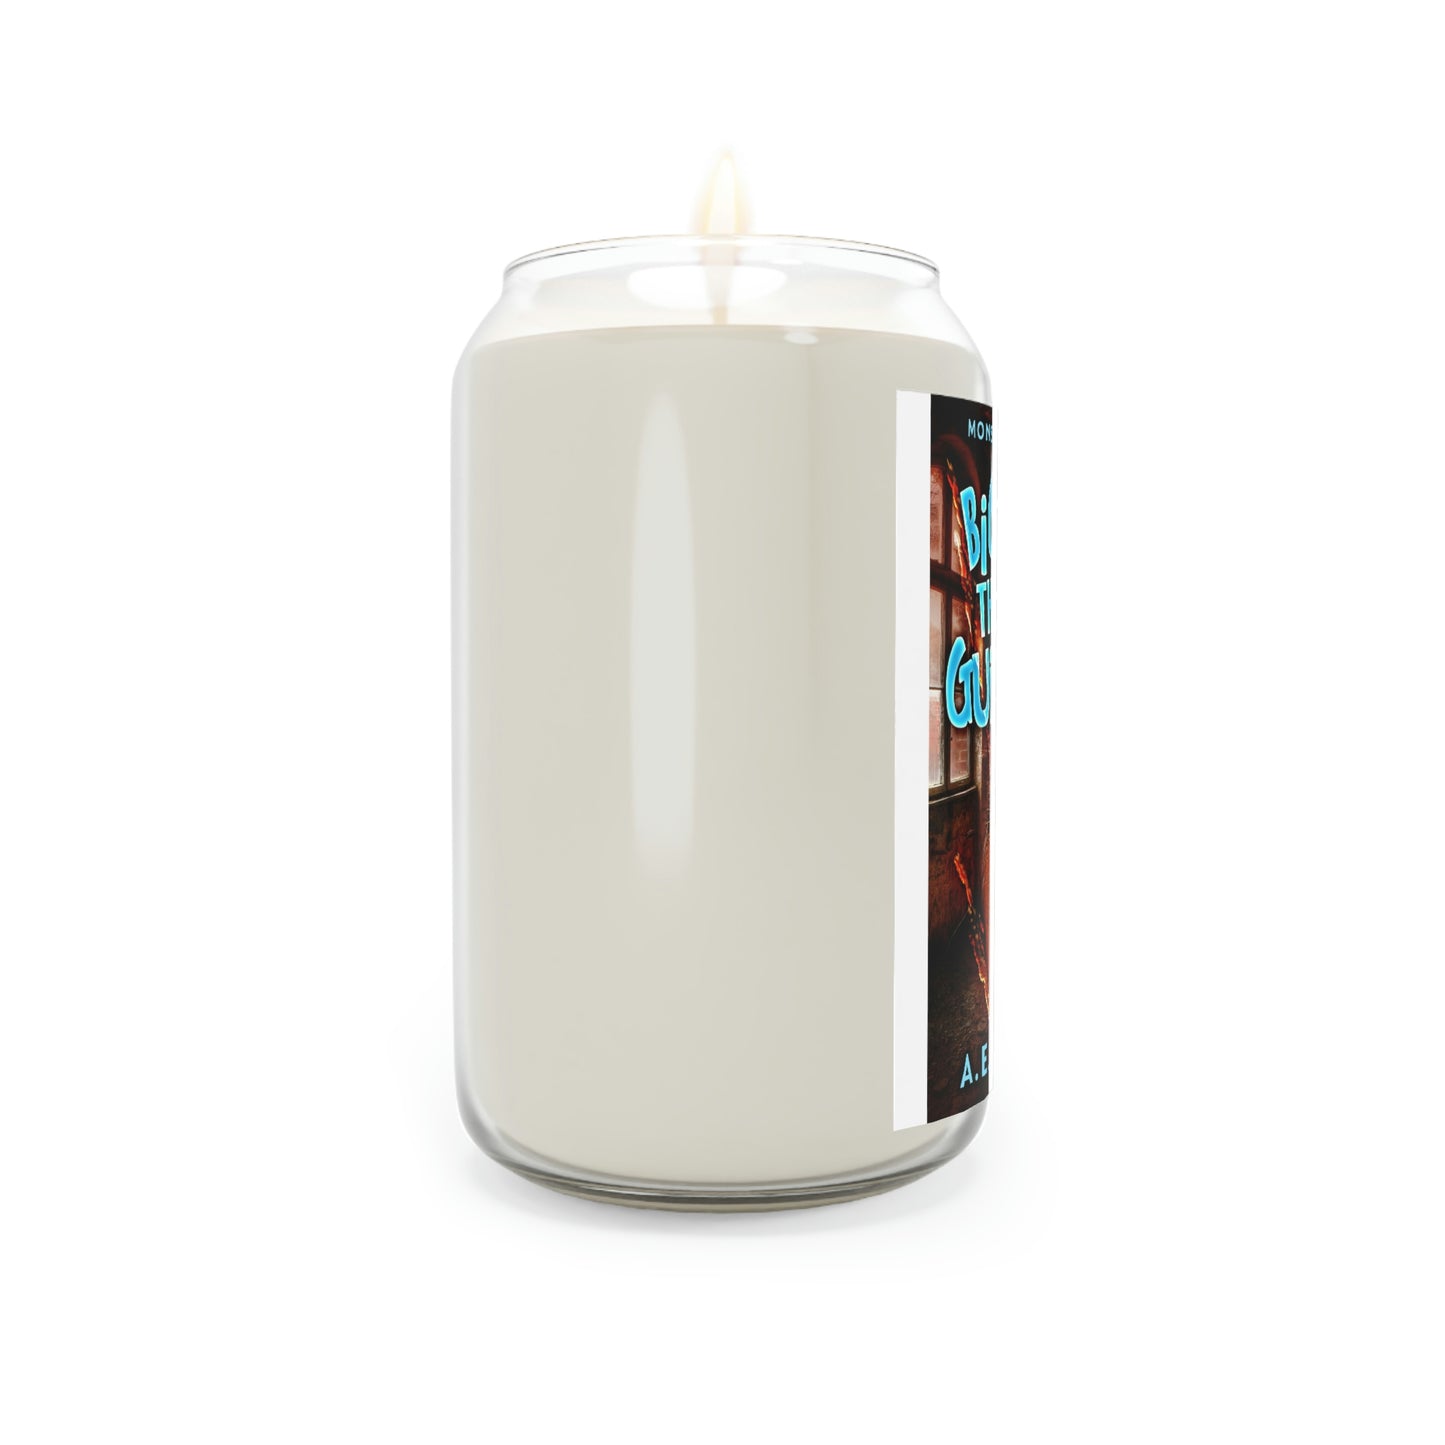 Big Ben The Mean Guinea Pig - Scented Candle